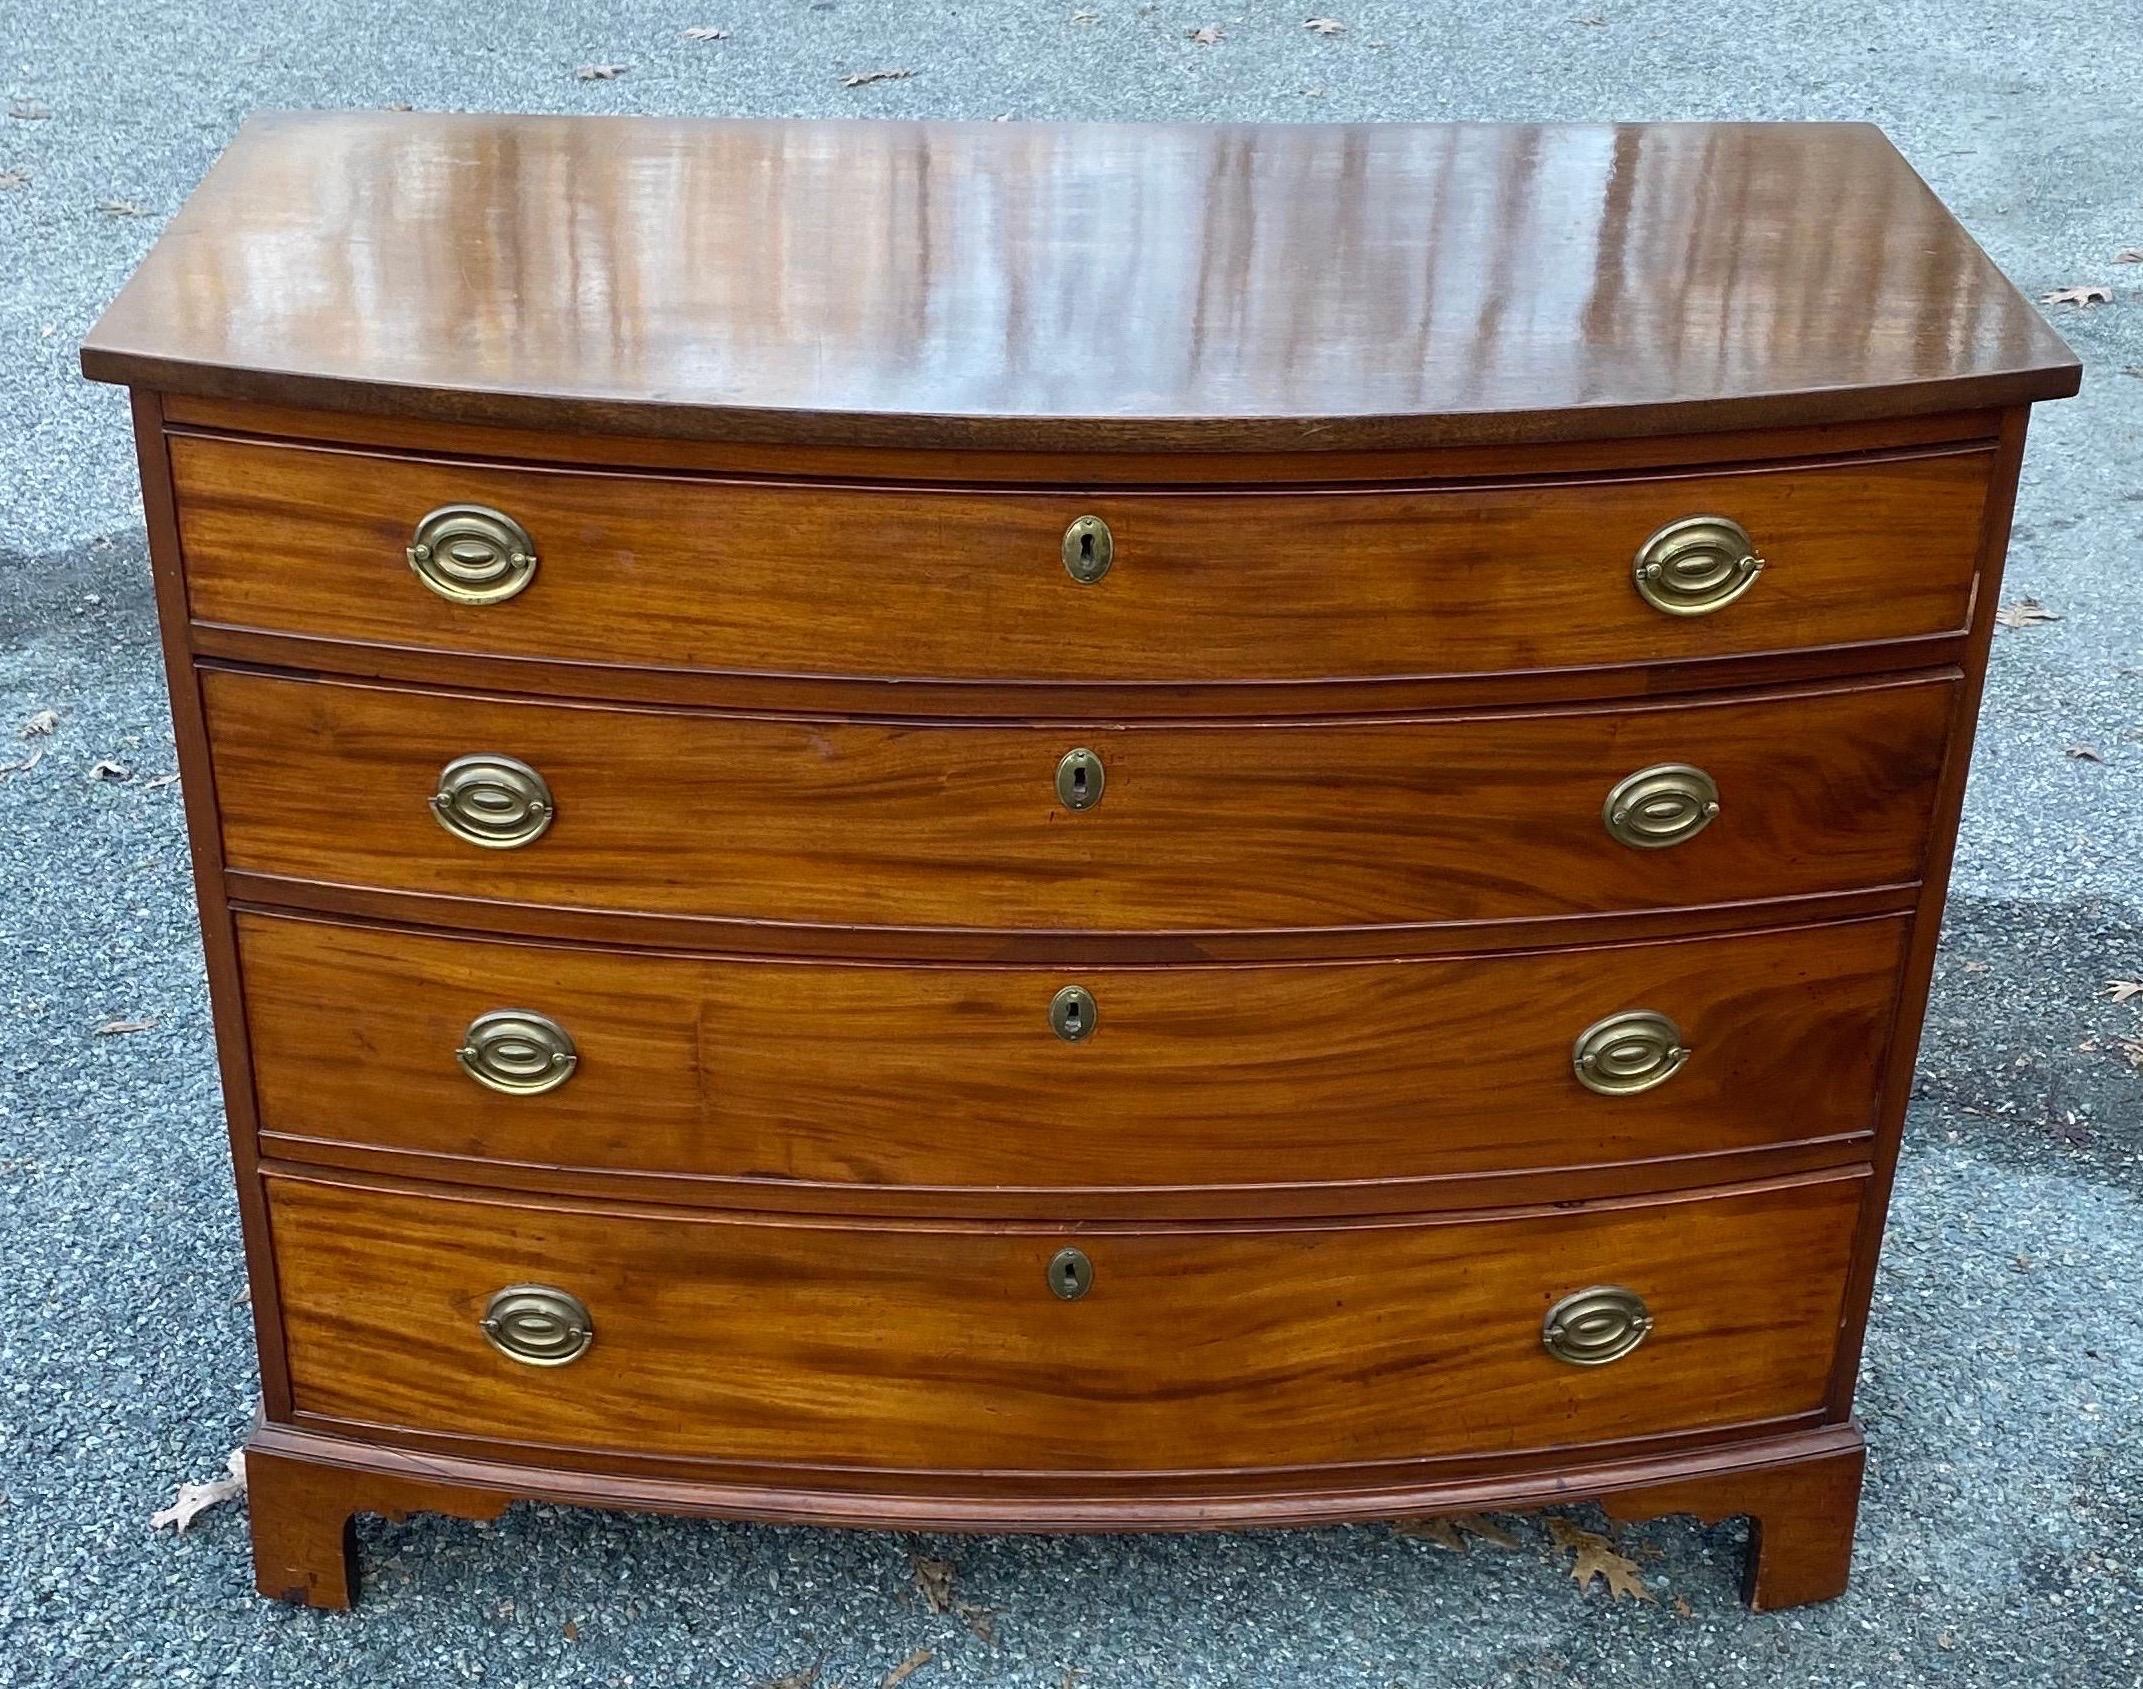 19th Century English 4-Drawer Bowfront Chest of Drawers with Figured Mahogany In Good Condition For Sale In Charleston, SC